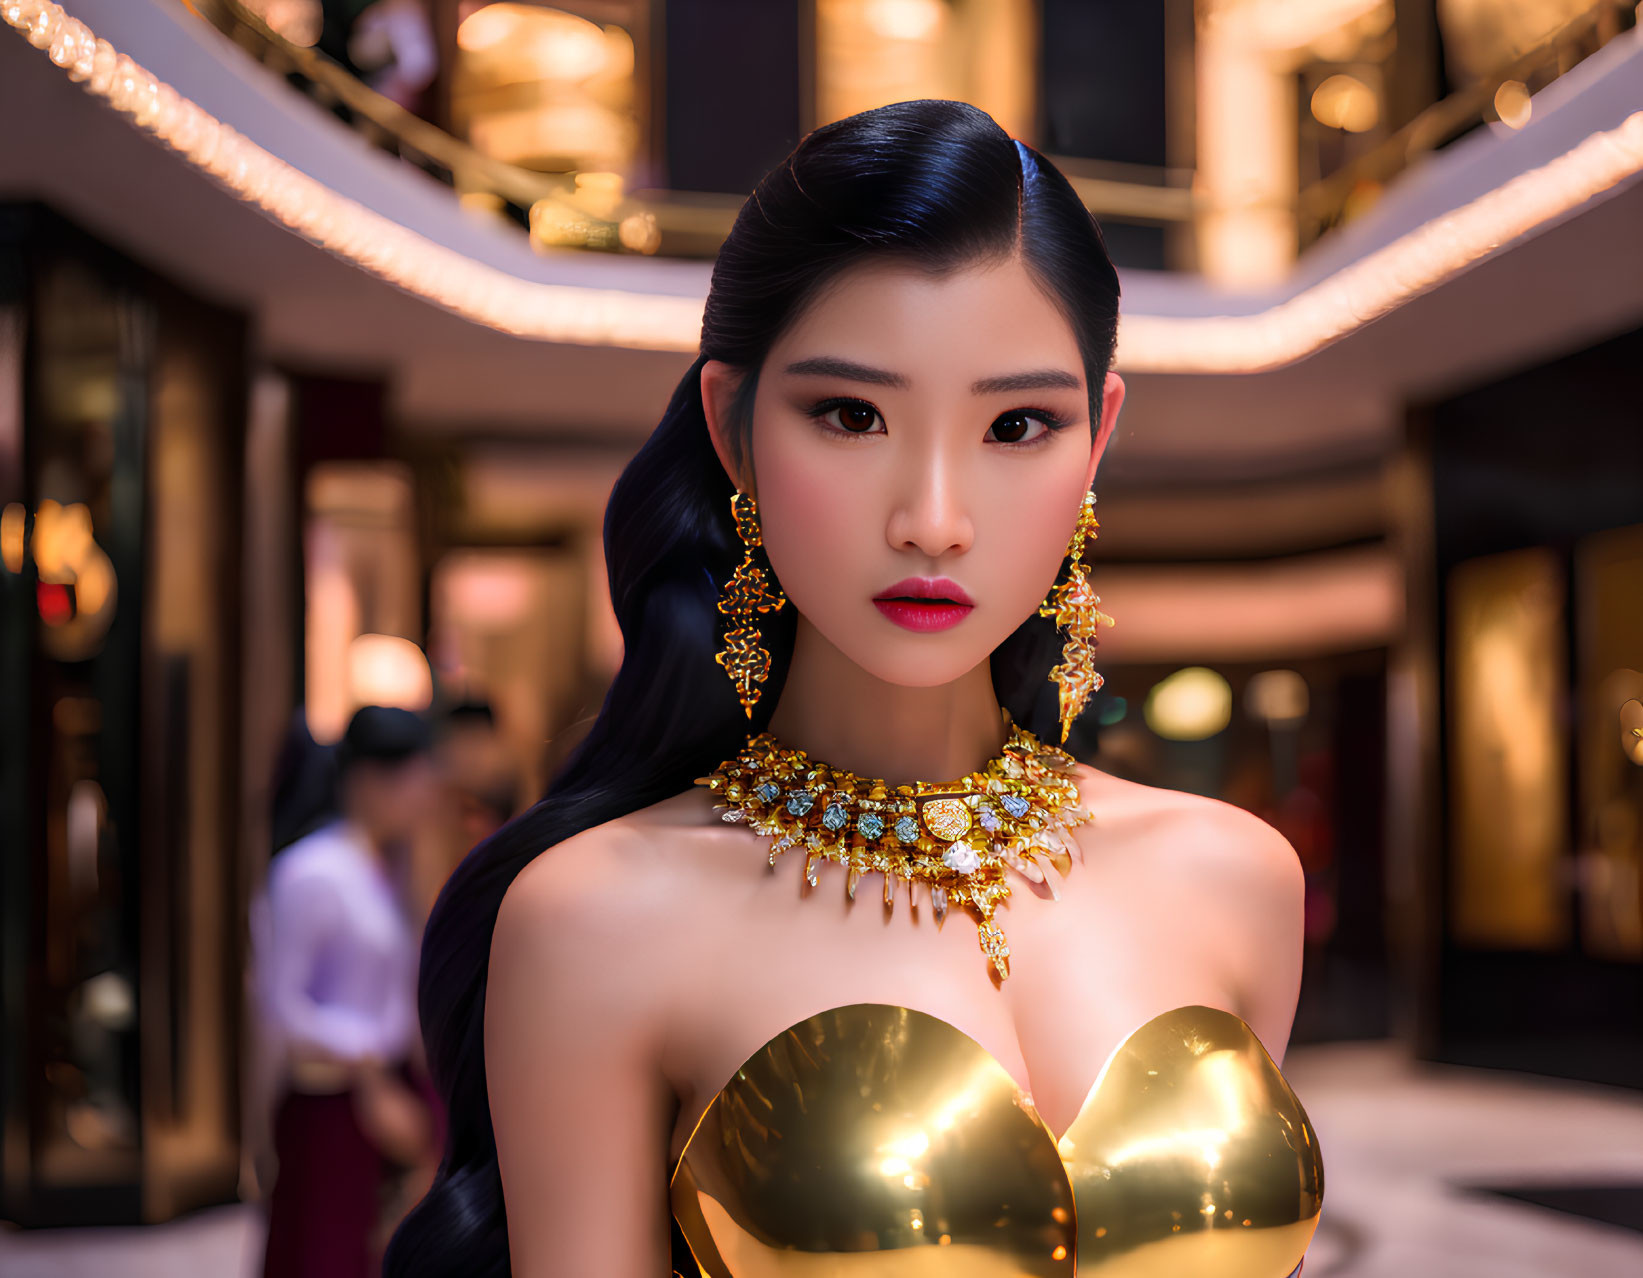 Dark-haired woman in gold dress and red lipstick indoors with ornate jewelry